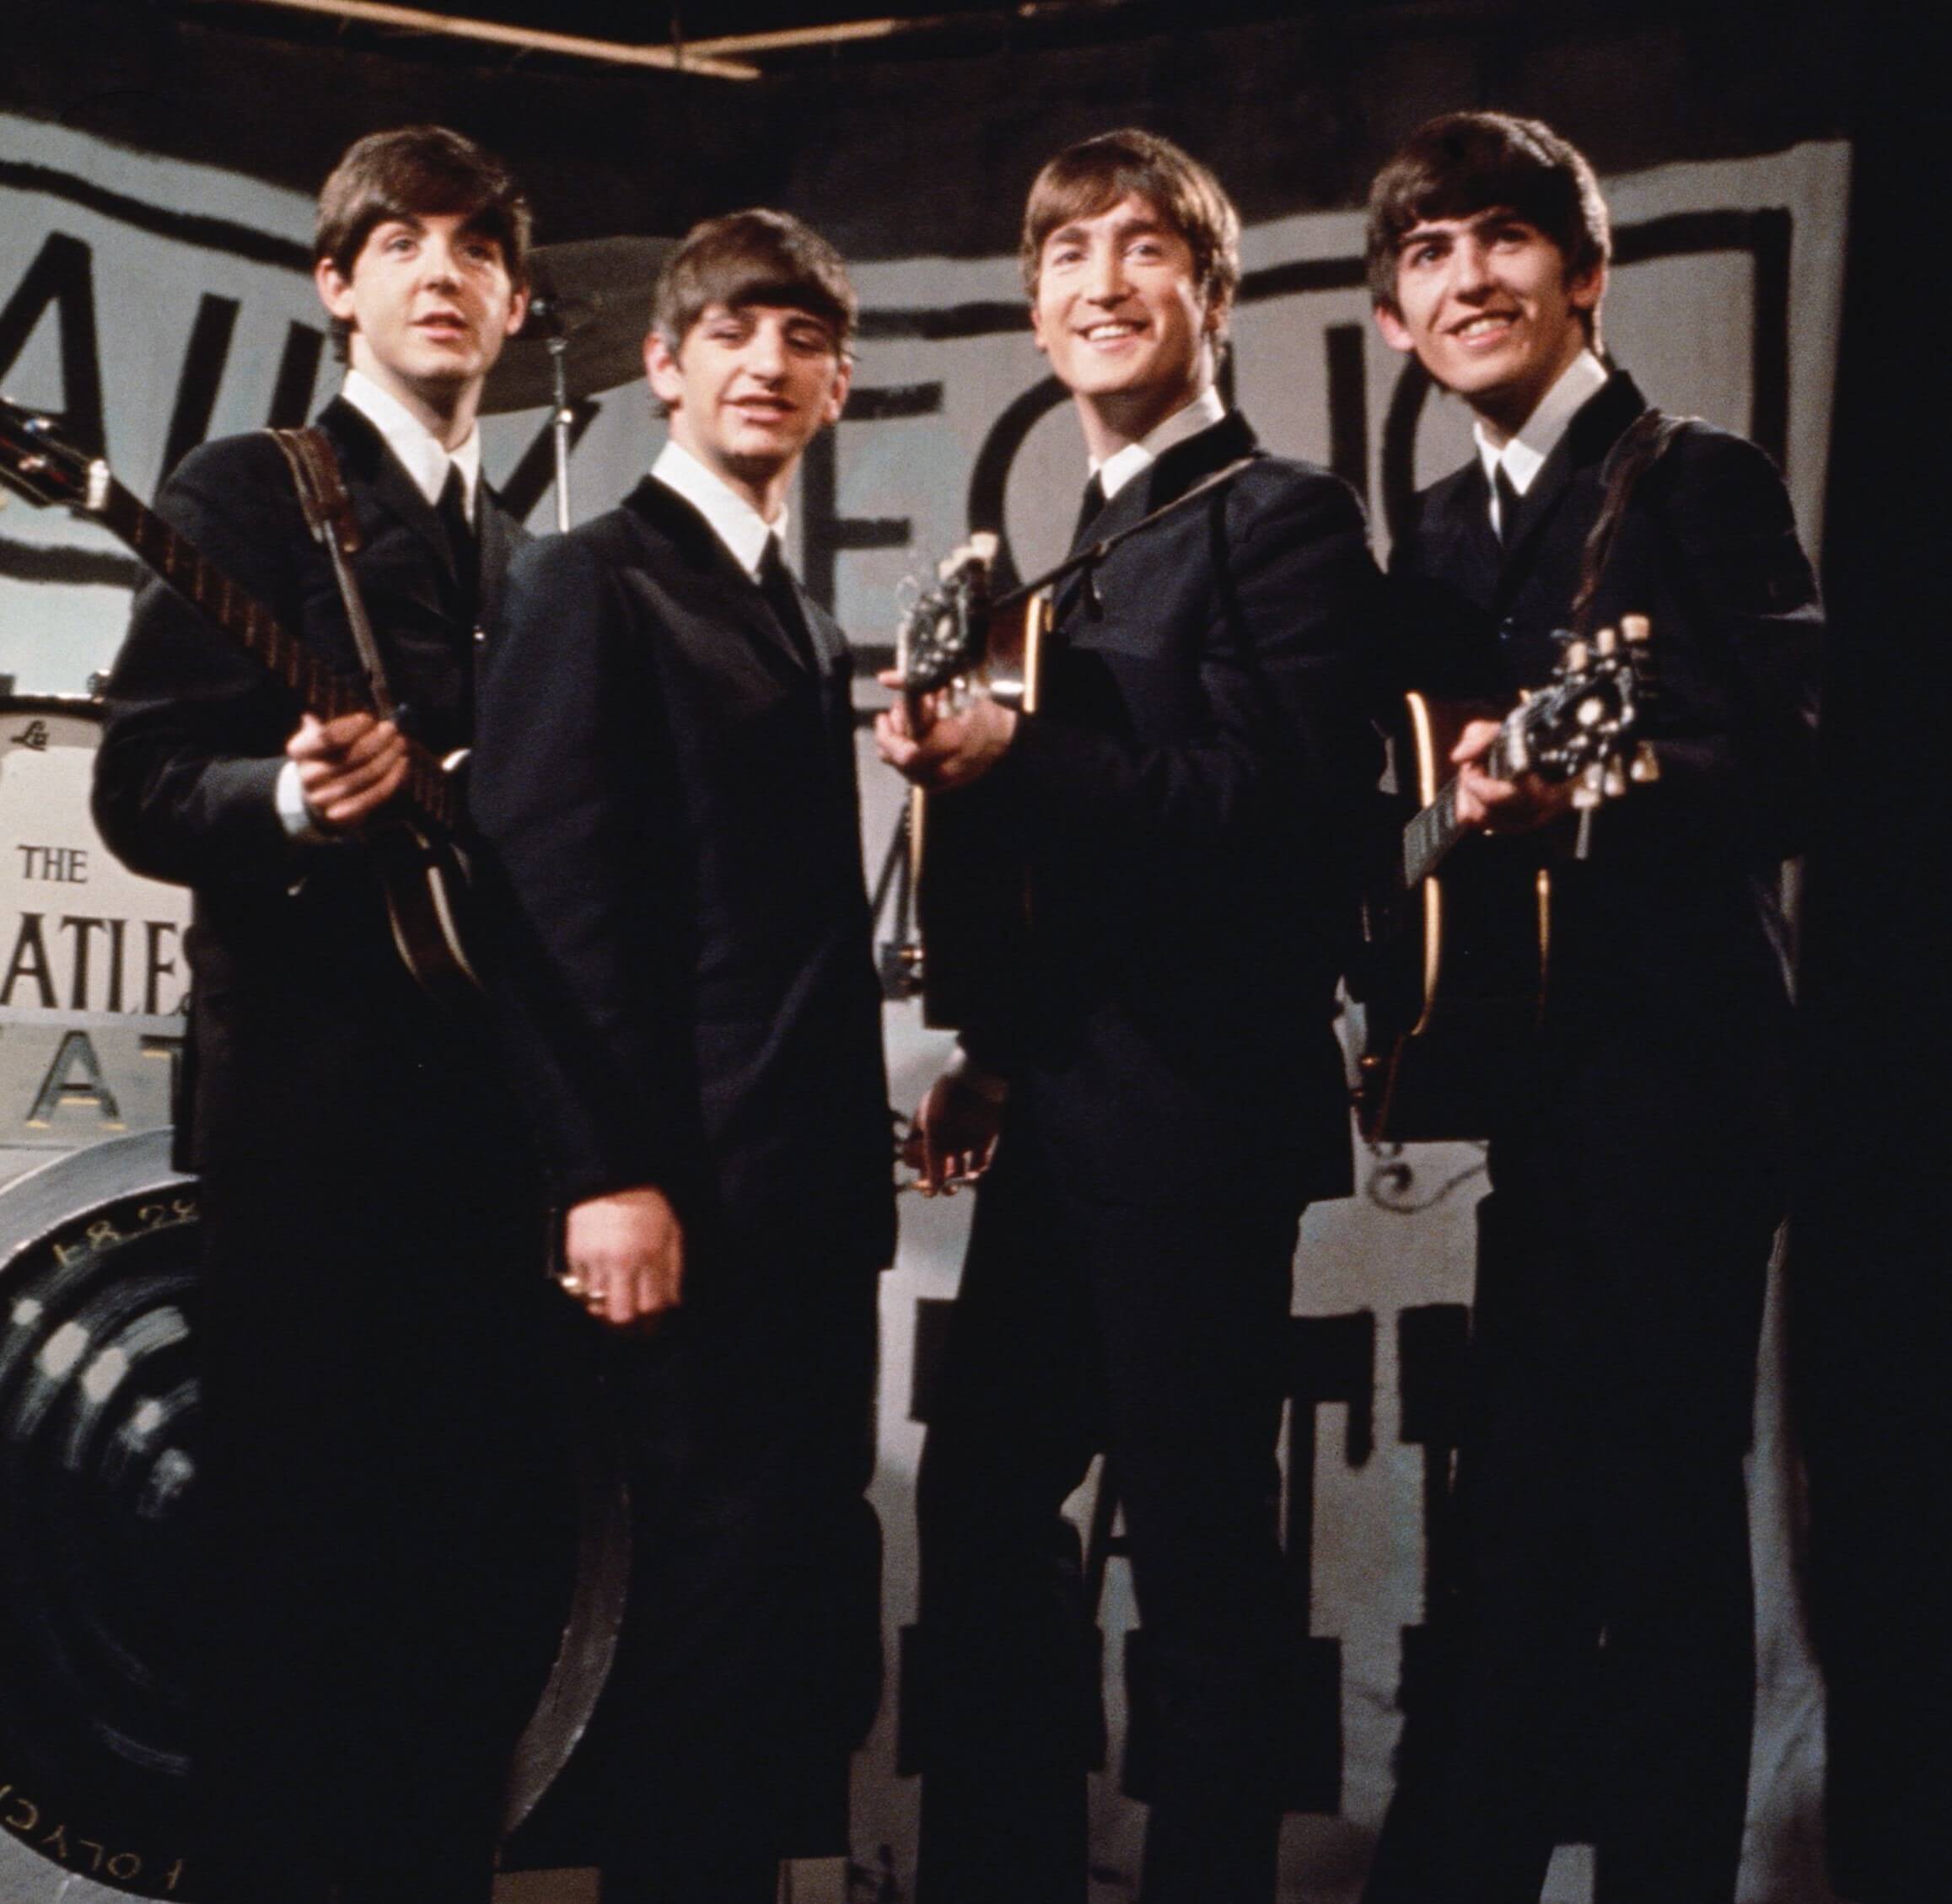 The Beatles in suits during their "My Bonnie" era